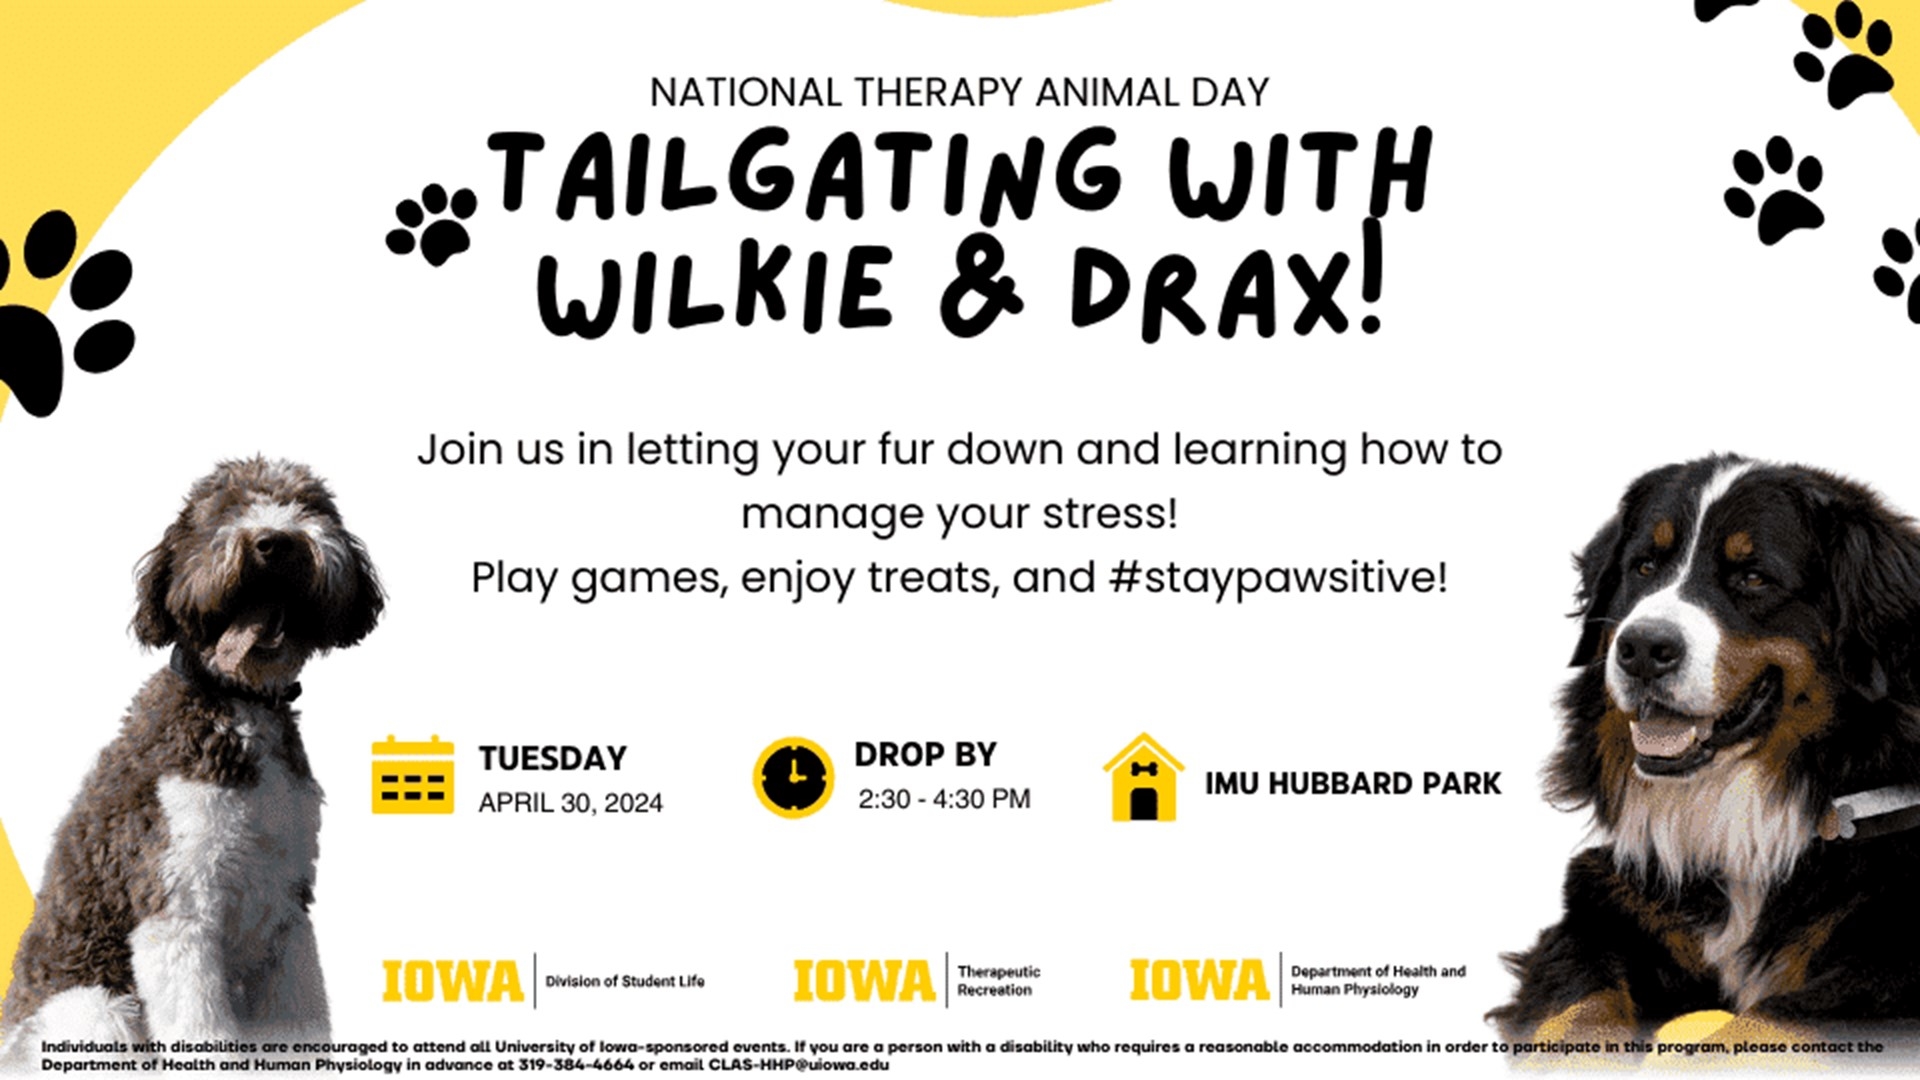 National Therapy Animal Day. Tailgating with Wilkie and Drax. 4/30, 2:30-4:30p, IMU Hubbard Park.